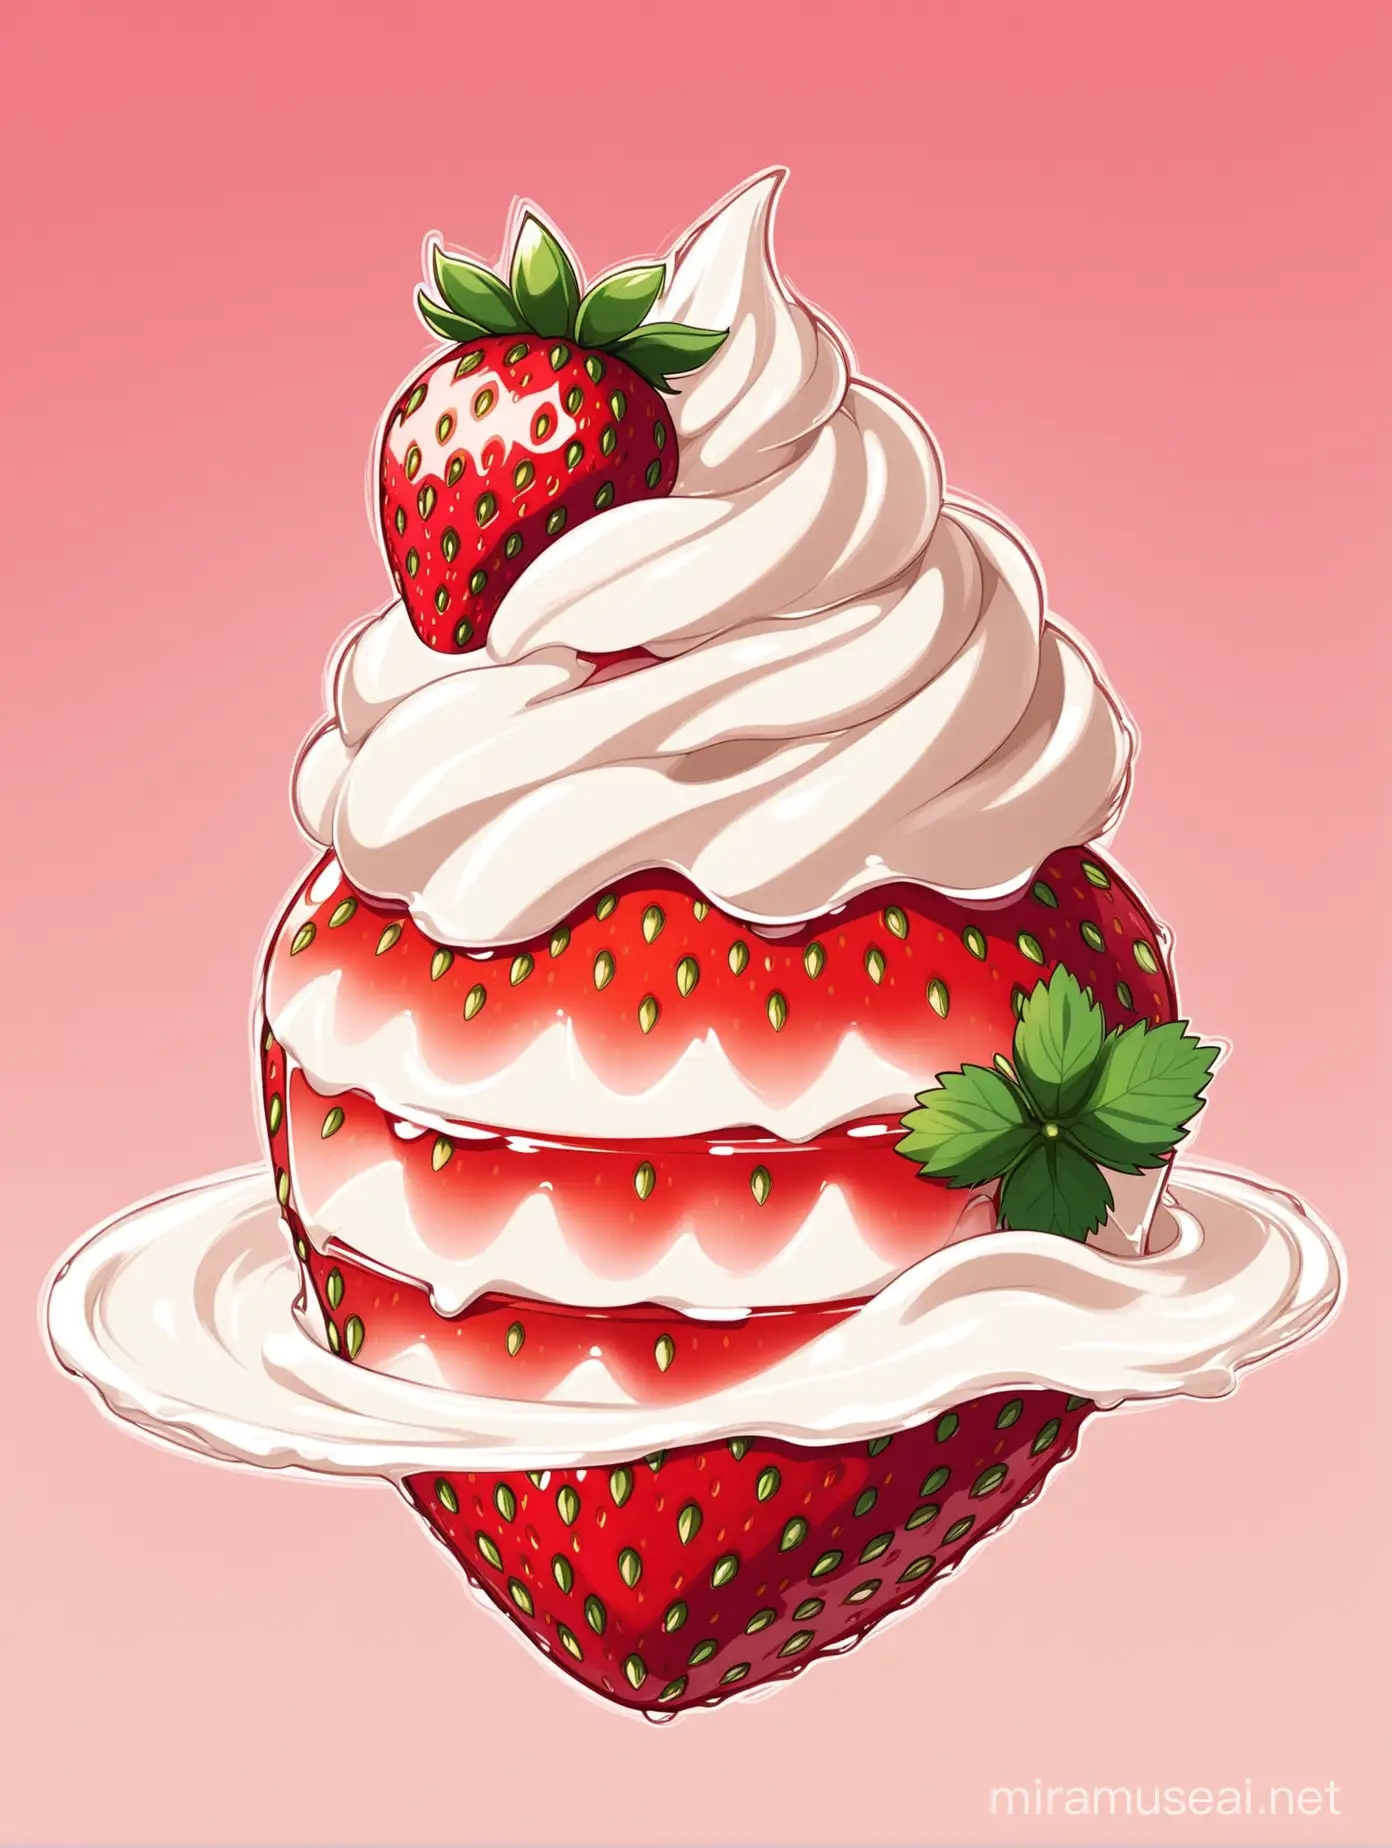 Animestyle Strawberry with Cream Playful Anime Character Holding a Juicy Strawberry Topped with Cream